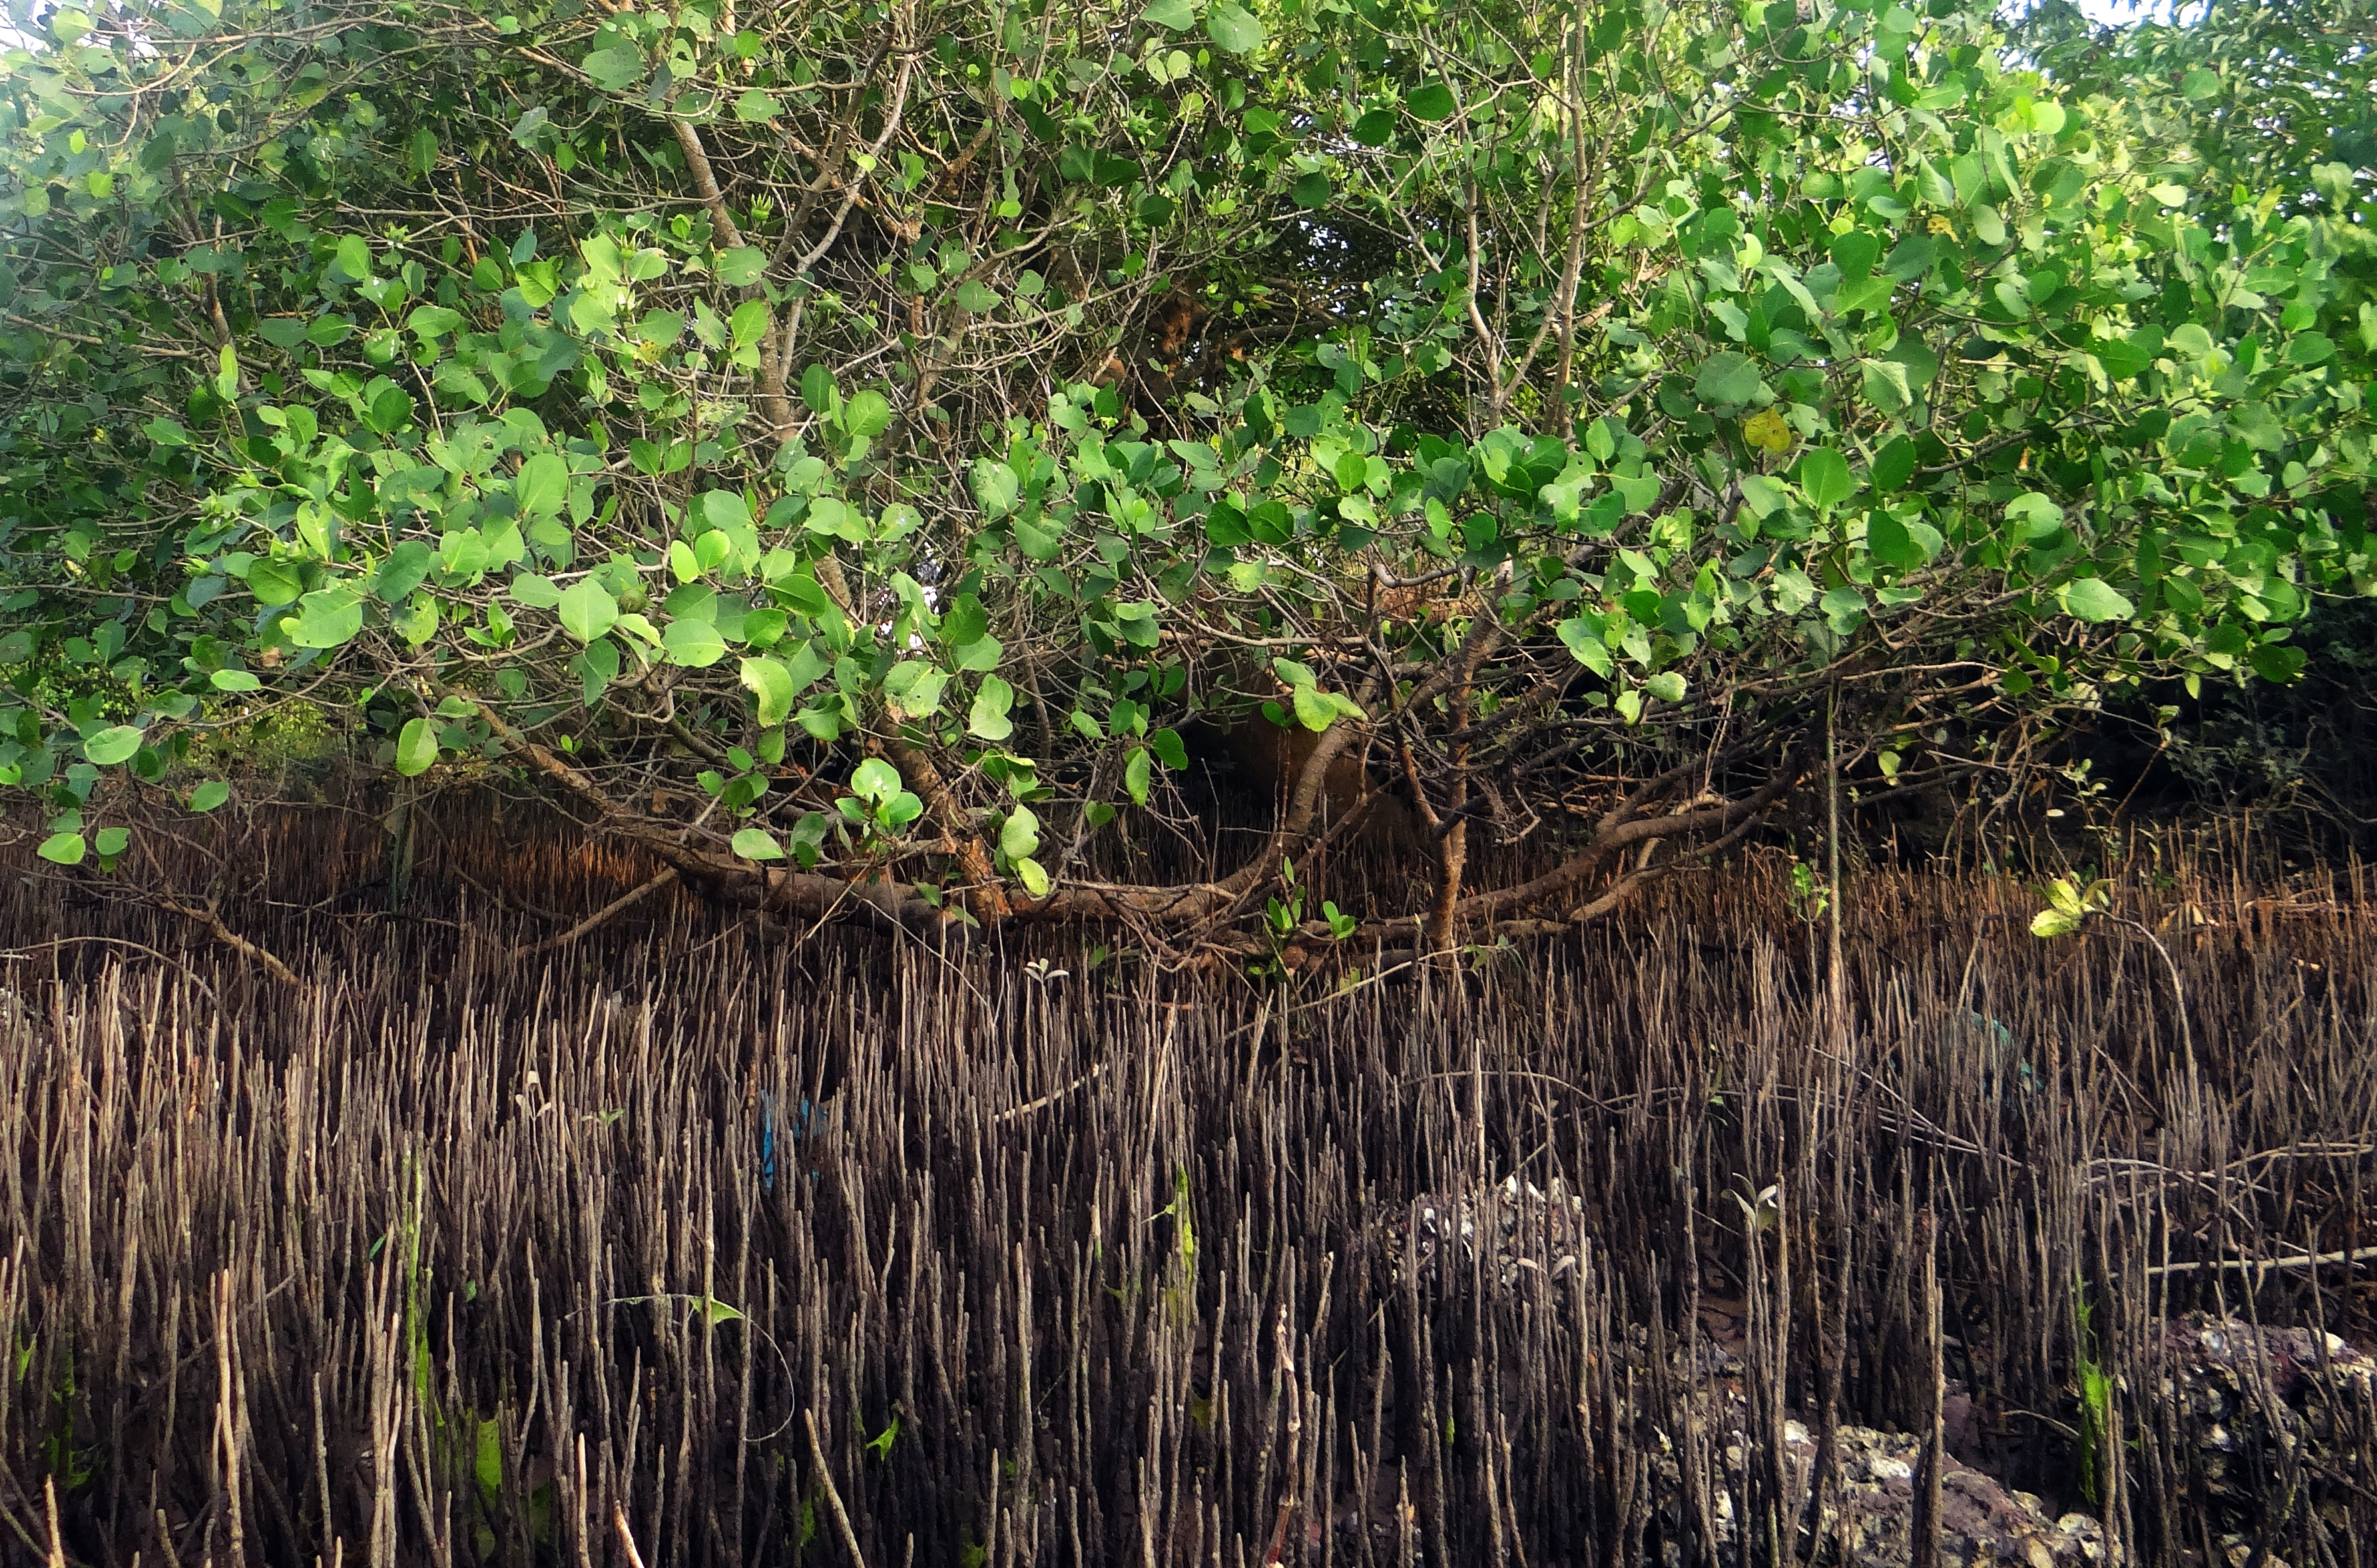 Mangrove forest in India